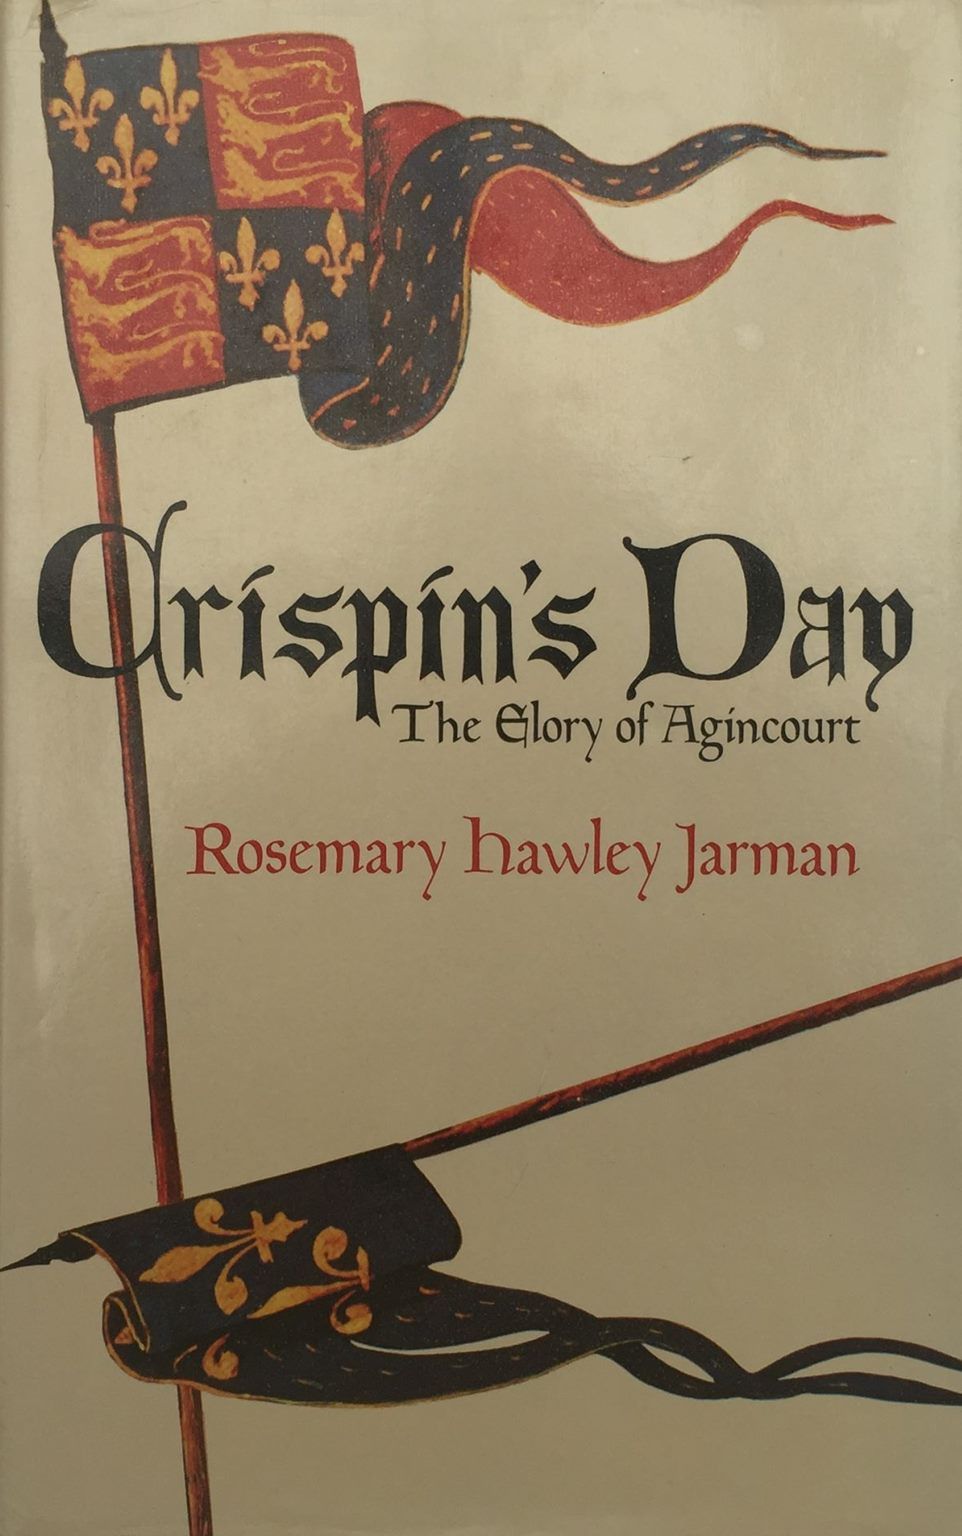 CRISPIN'S DAY: The Glory of Agincourt